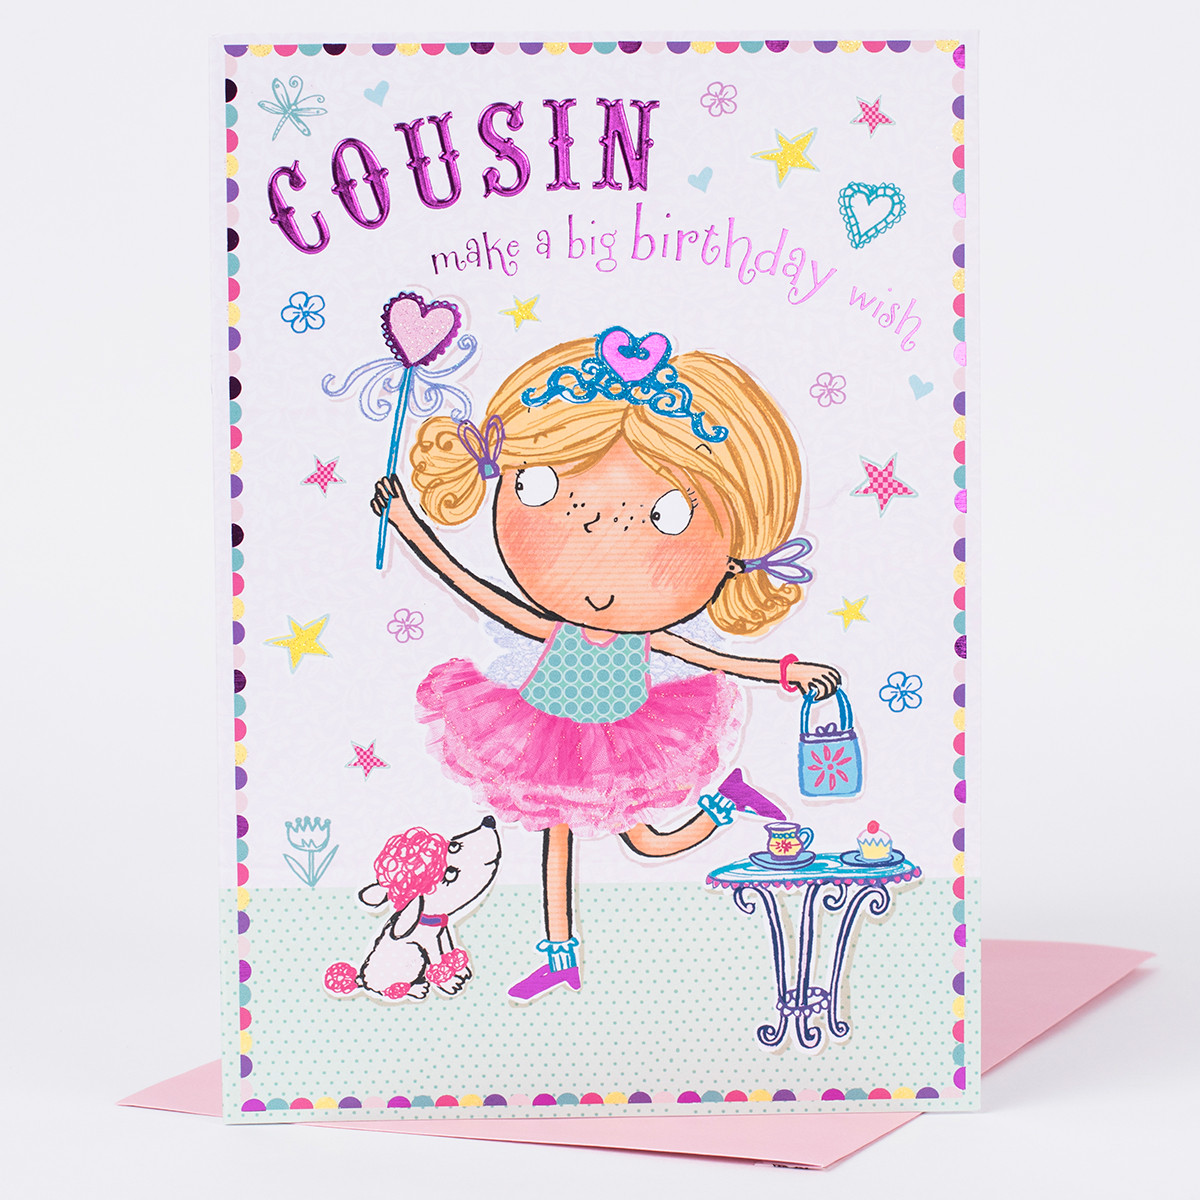 Birthday Card For Cousin
 Birthday Card Cousin Make A Big Birthday Wish ly 89p